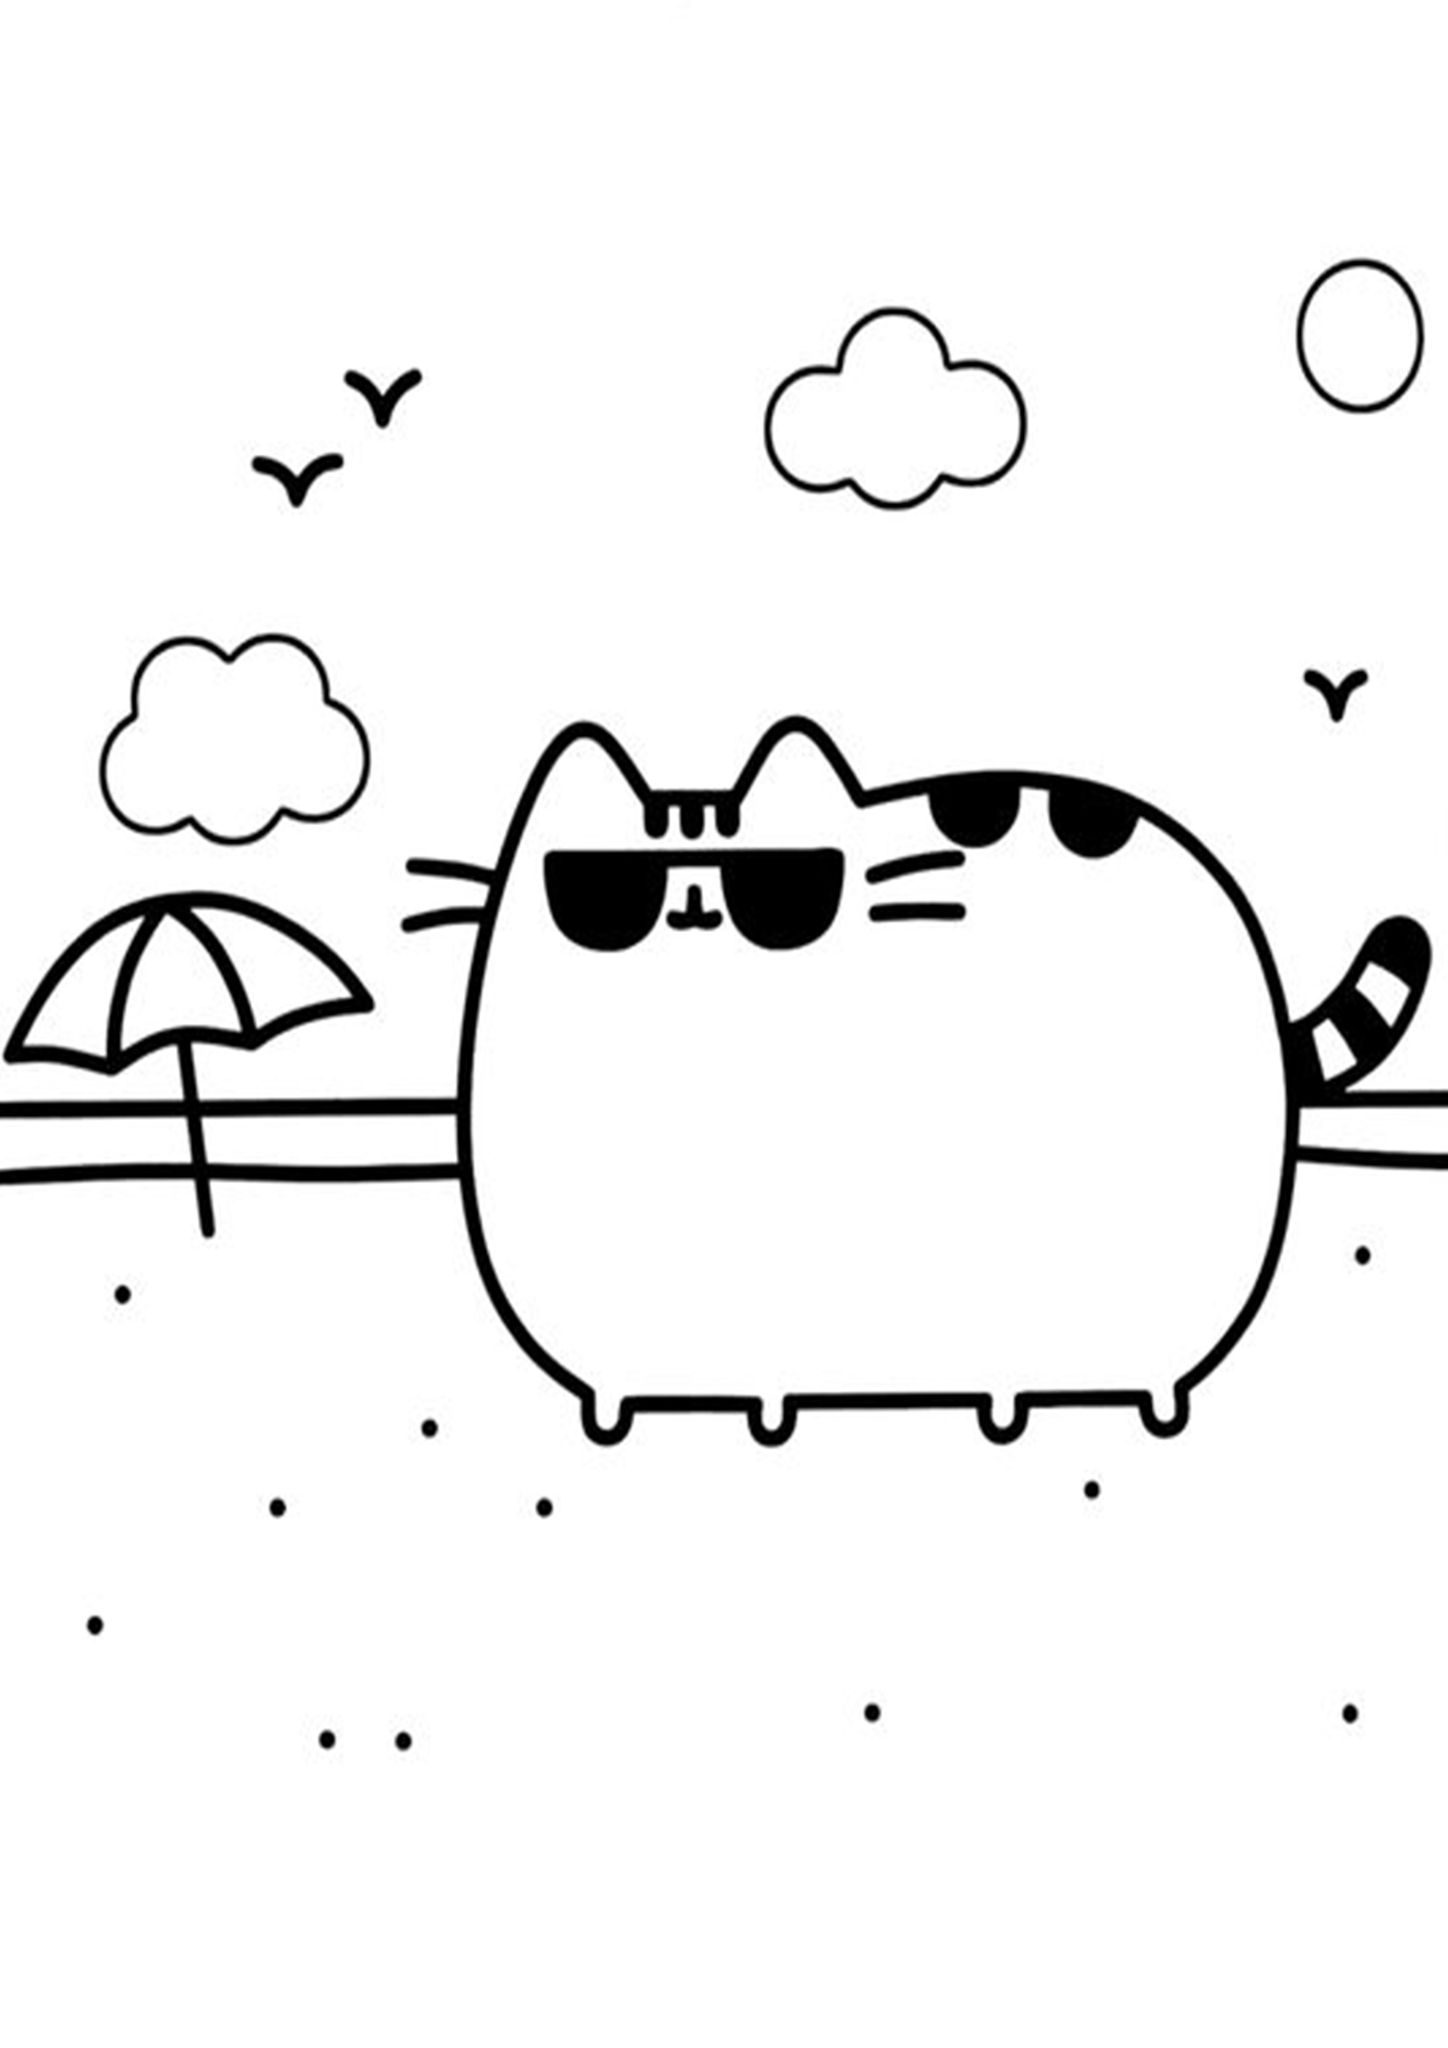 Free easy to print pusheen coloring pages pusheen coloring pages coloring pages cool coloring pages